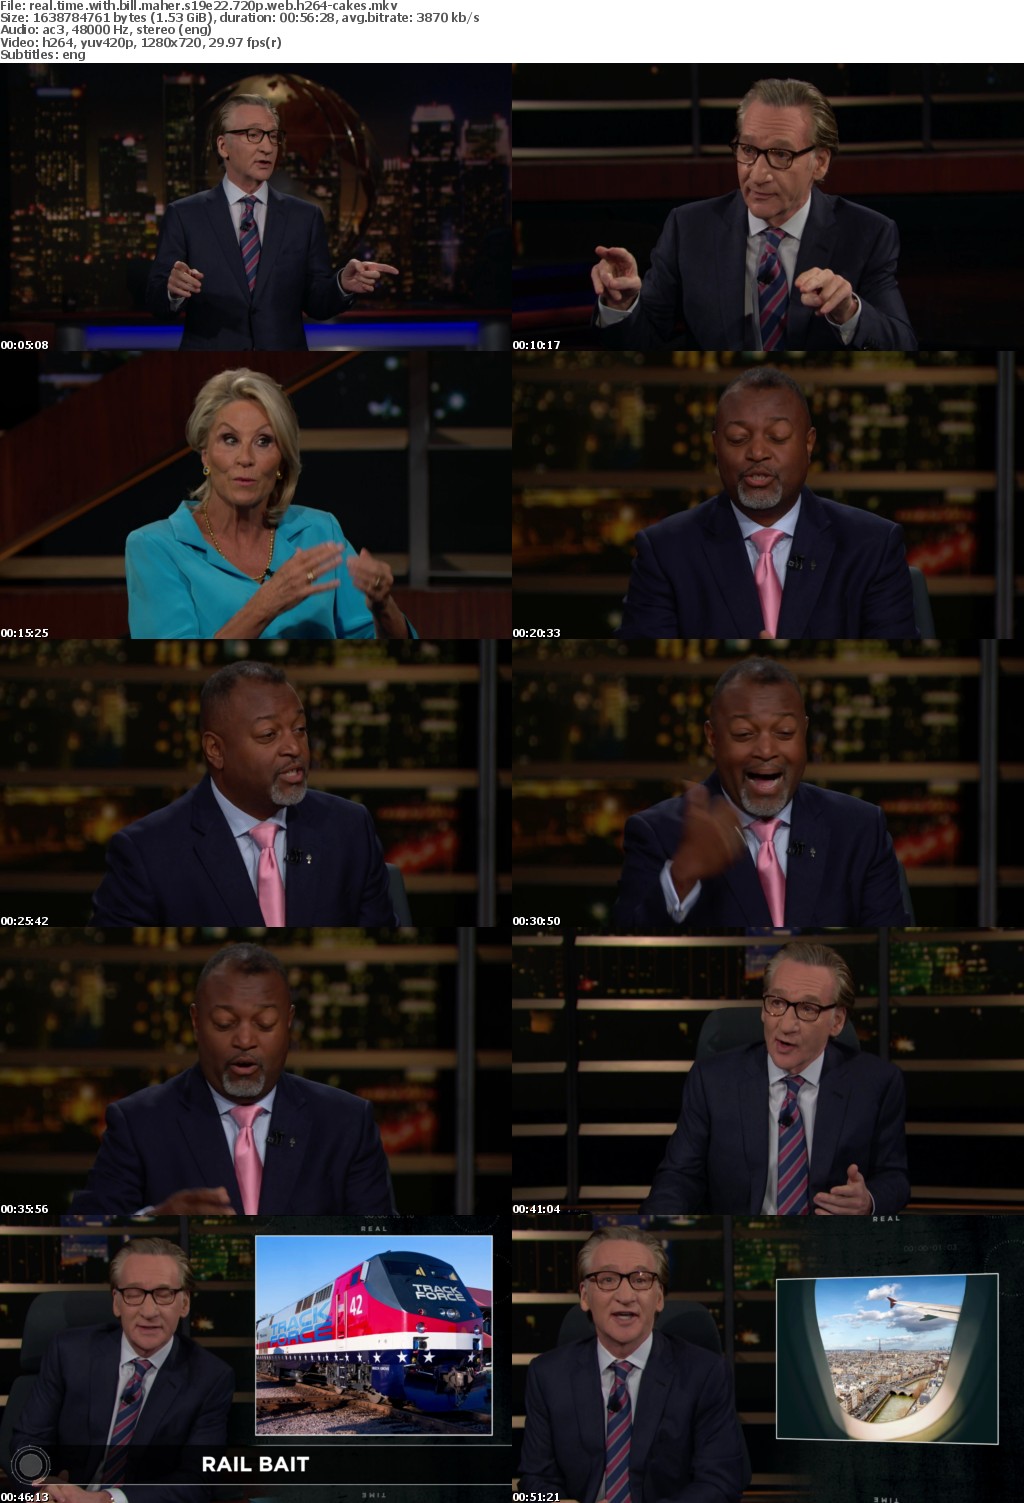 Real Time with Bill Maher S19E22 720p WEB H264-CAKES